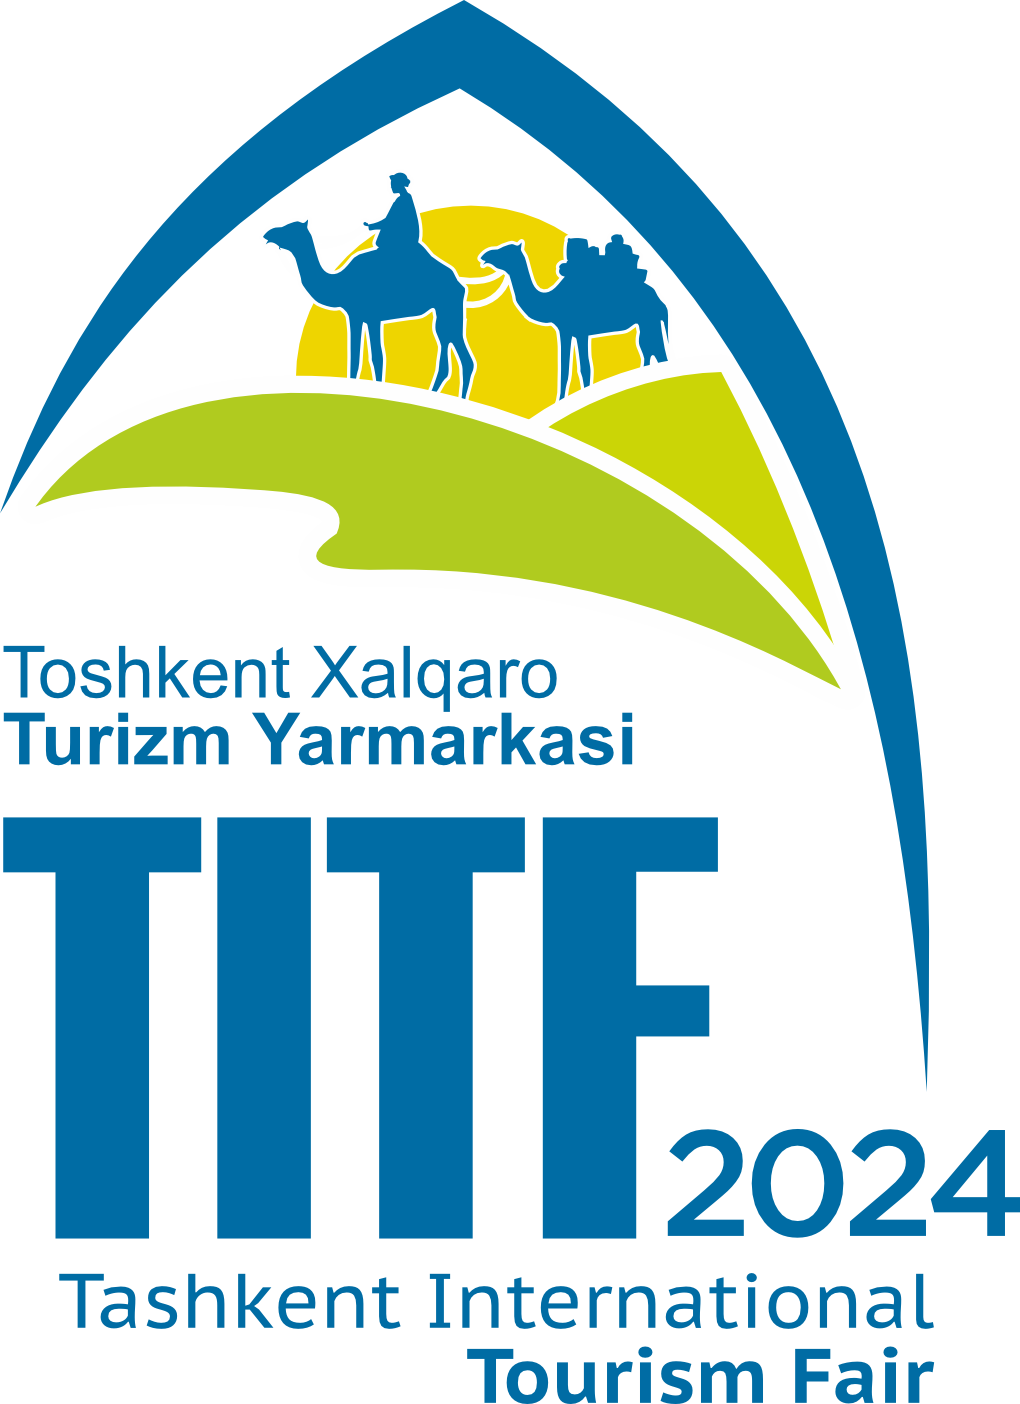 Tashkent International Tourism Fair 2024 (TITF 2024) “Tourism on the silk road” invites you to a world of limitless possibilities!